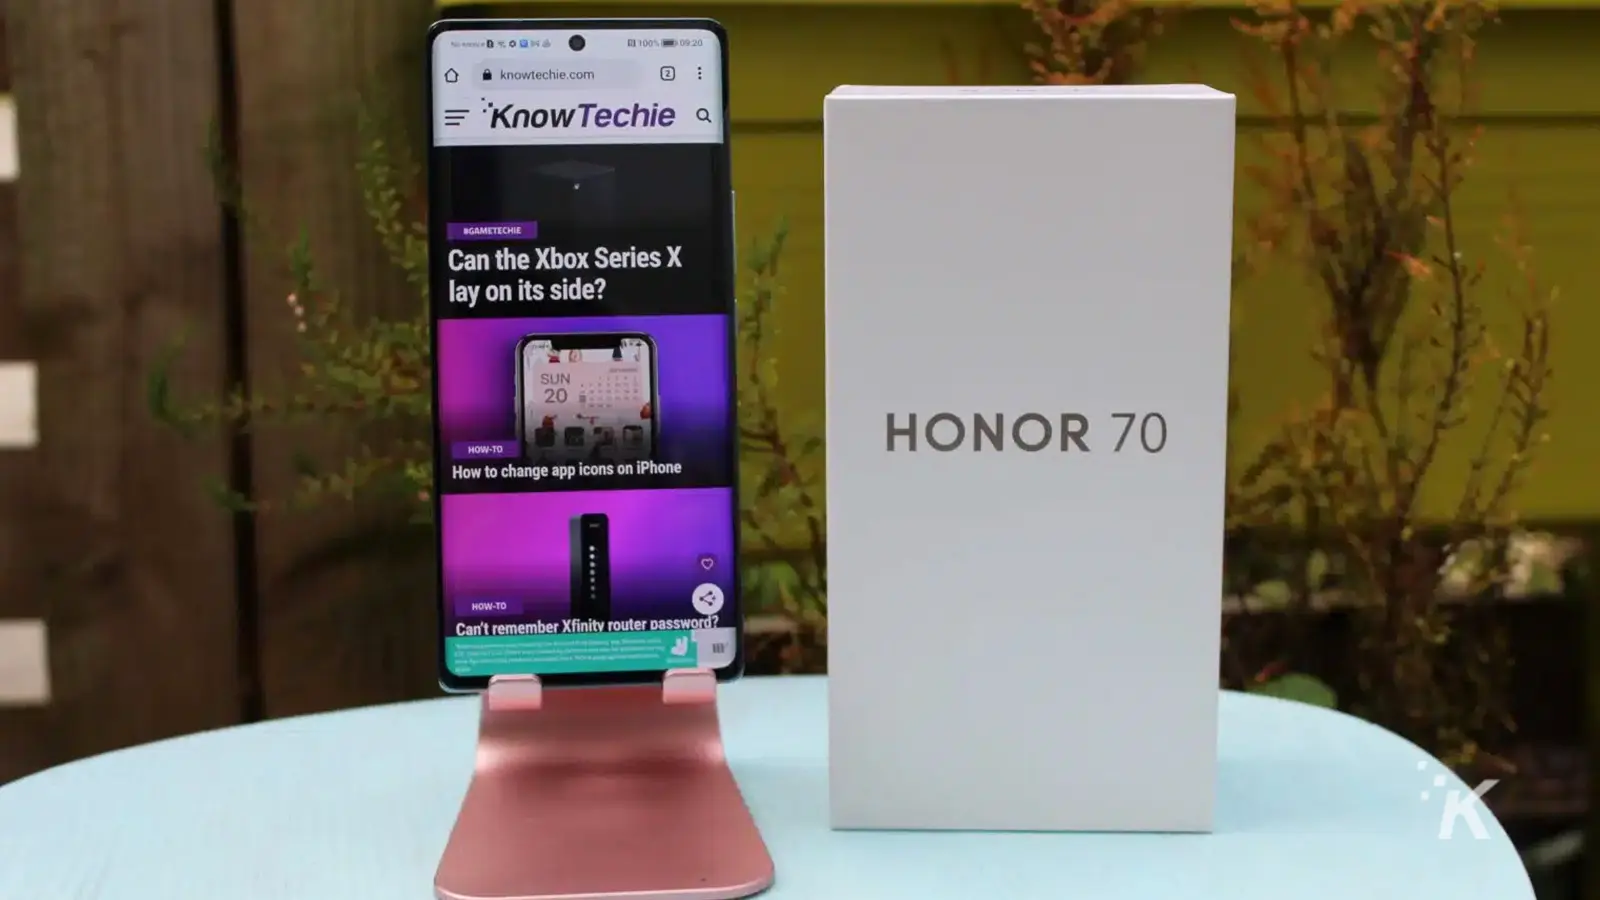 HONOR 70 phone on stand with KnowTechie website openned